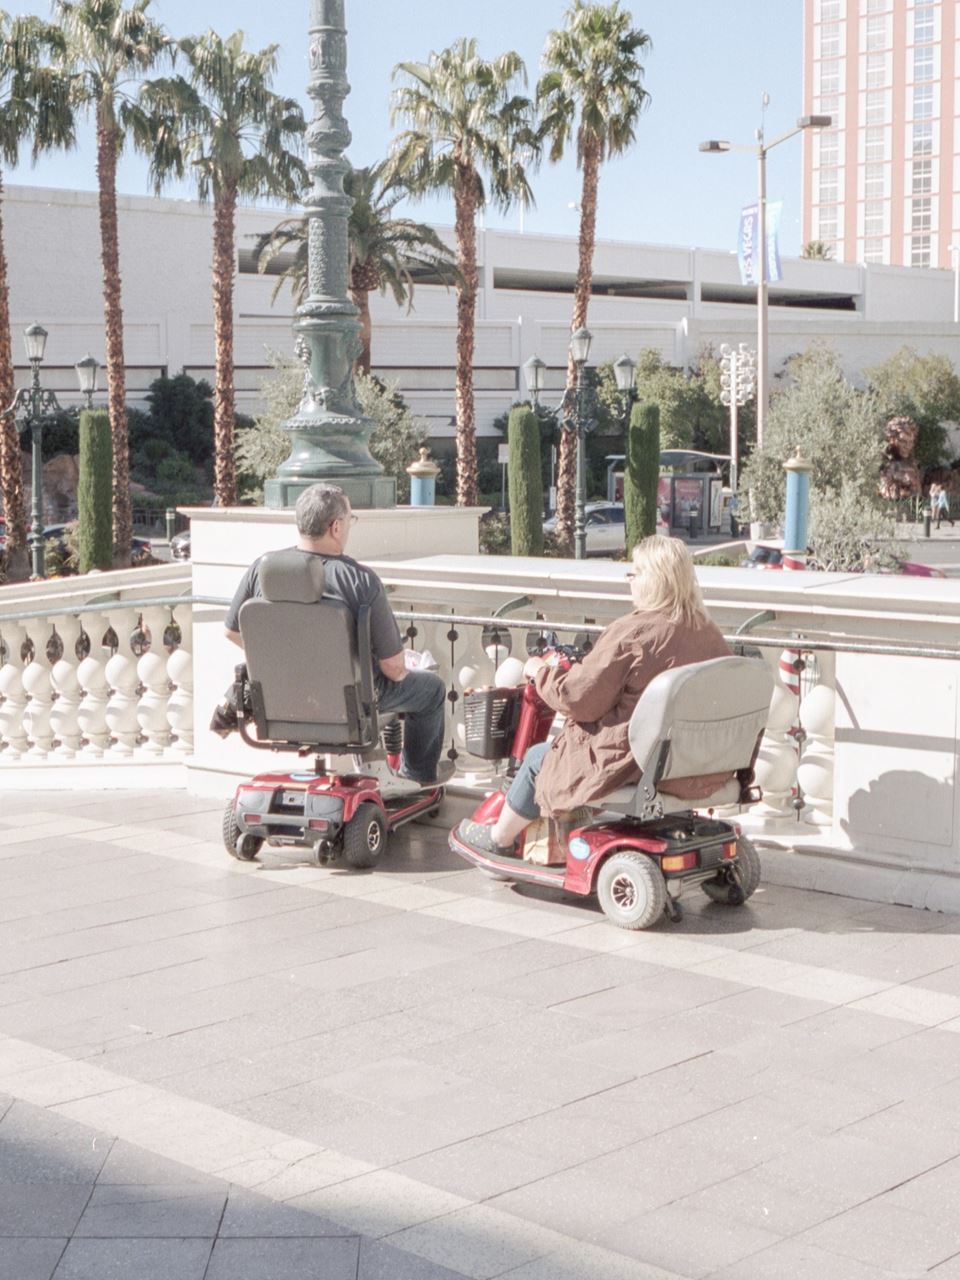 Two older, white people sit in mobility scooters, facing away from the camera and overlooking a street lined with palm trees.